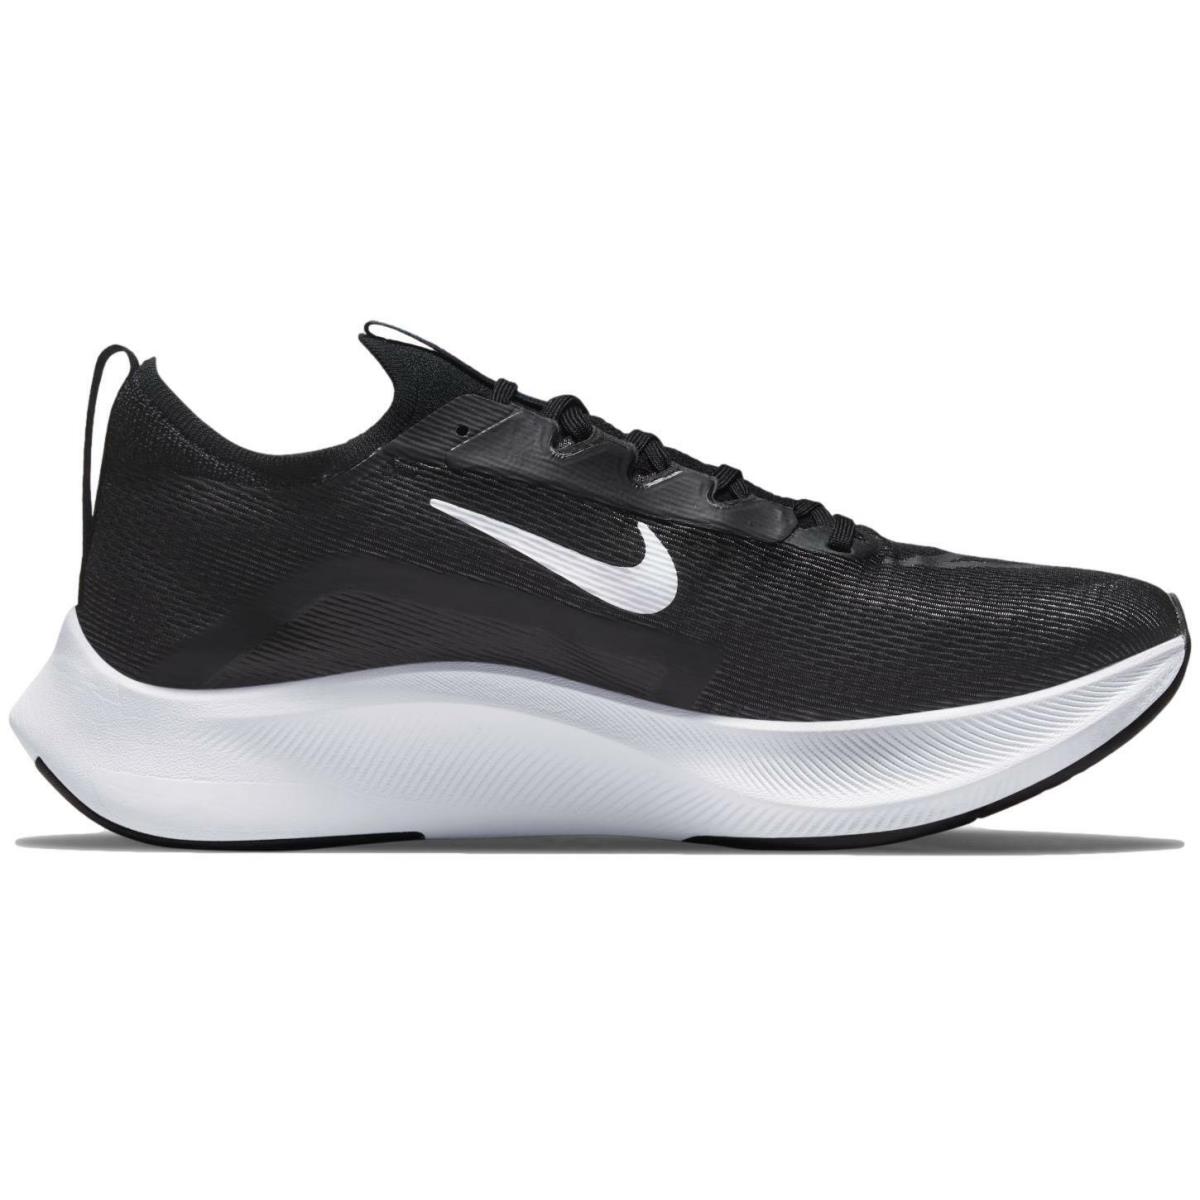 Nike shoes Zoom Fly - Black/White 2